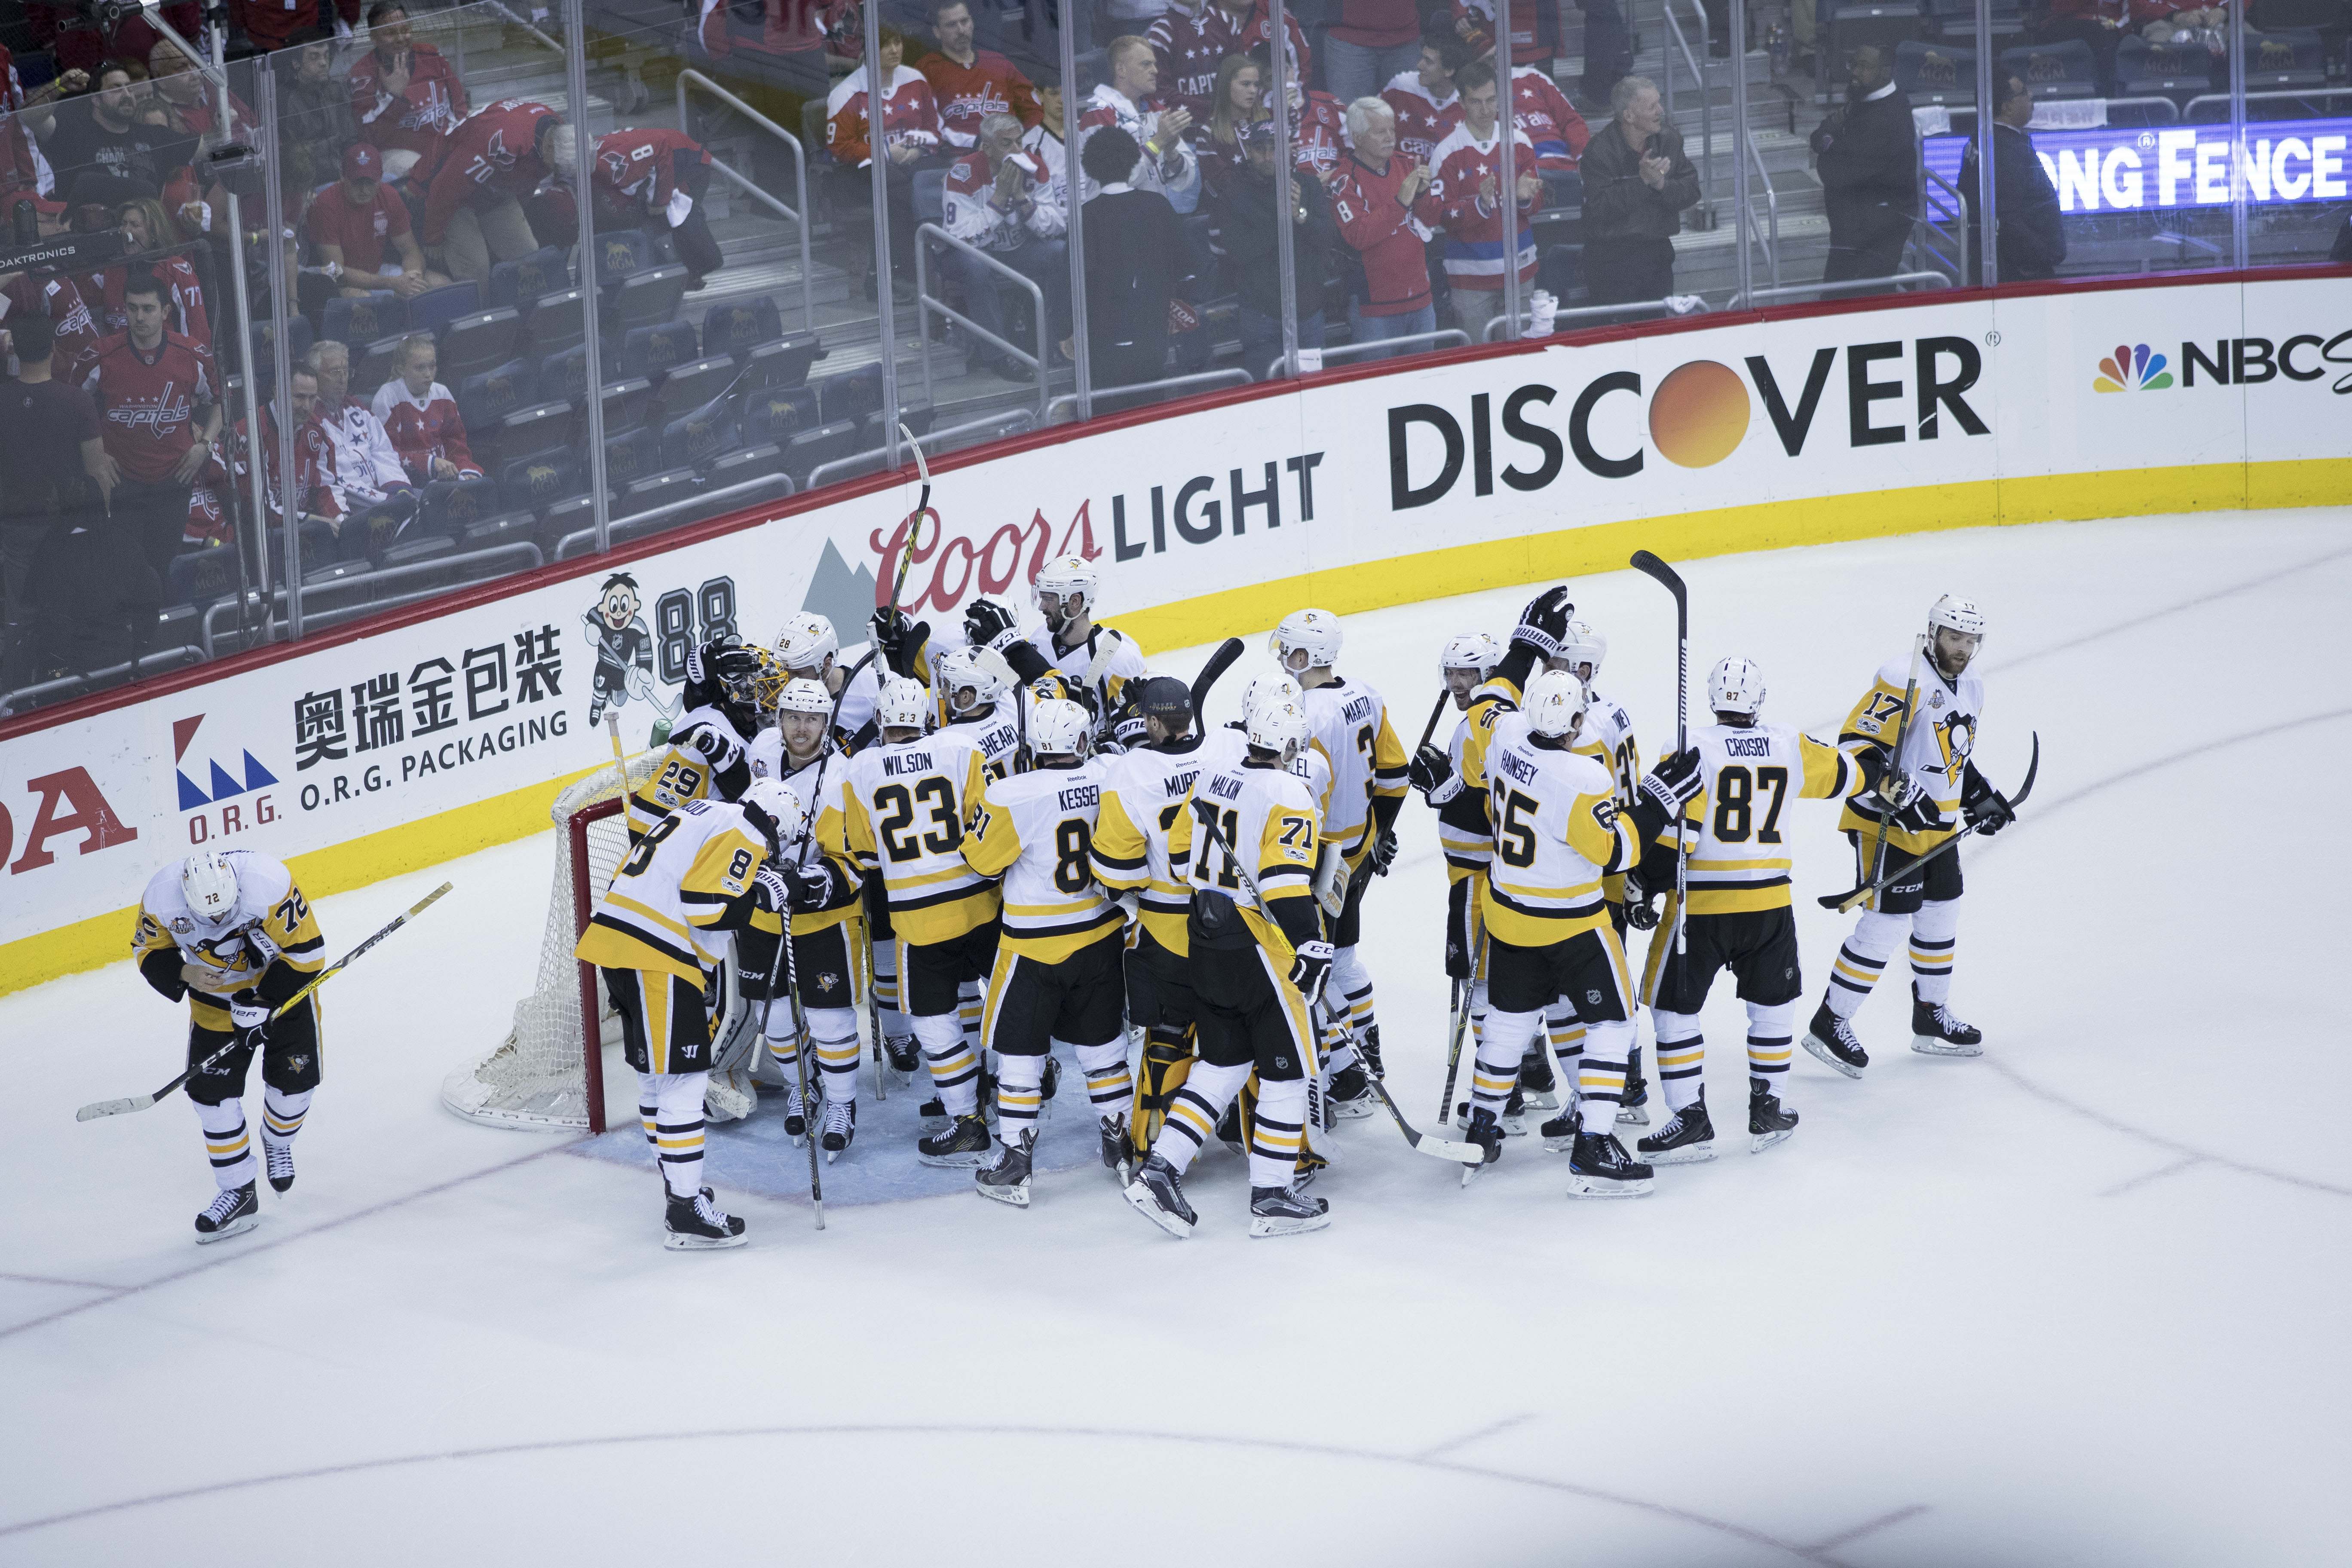 Score Big Savings: Your Guide to Affordable Stays Near PPG Paints Arena for Hockey Games